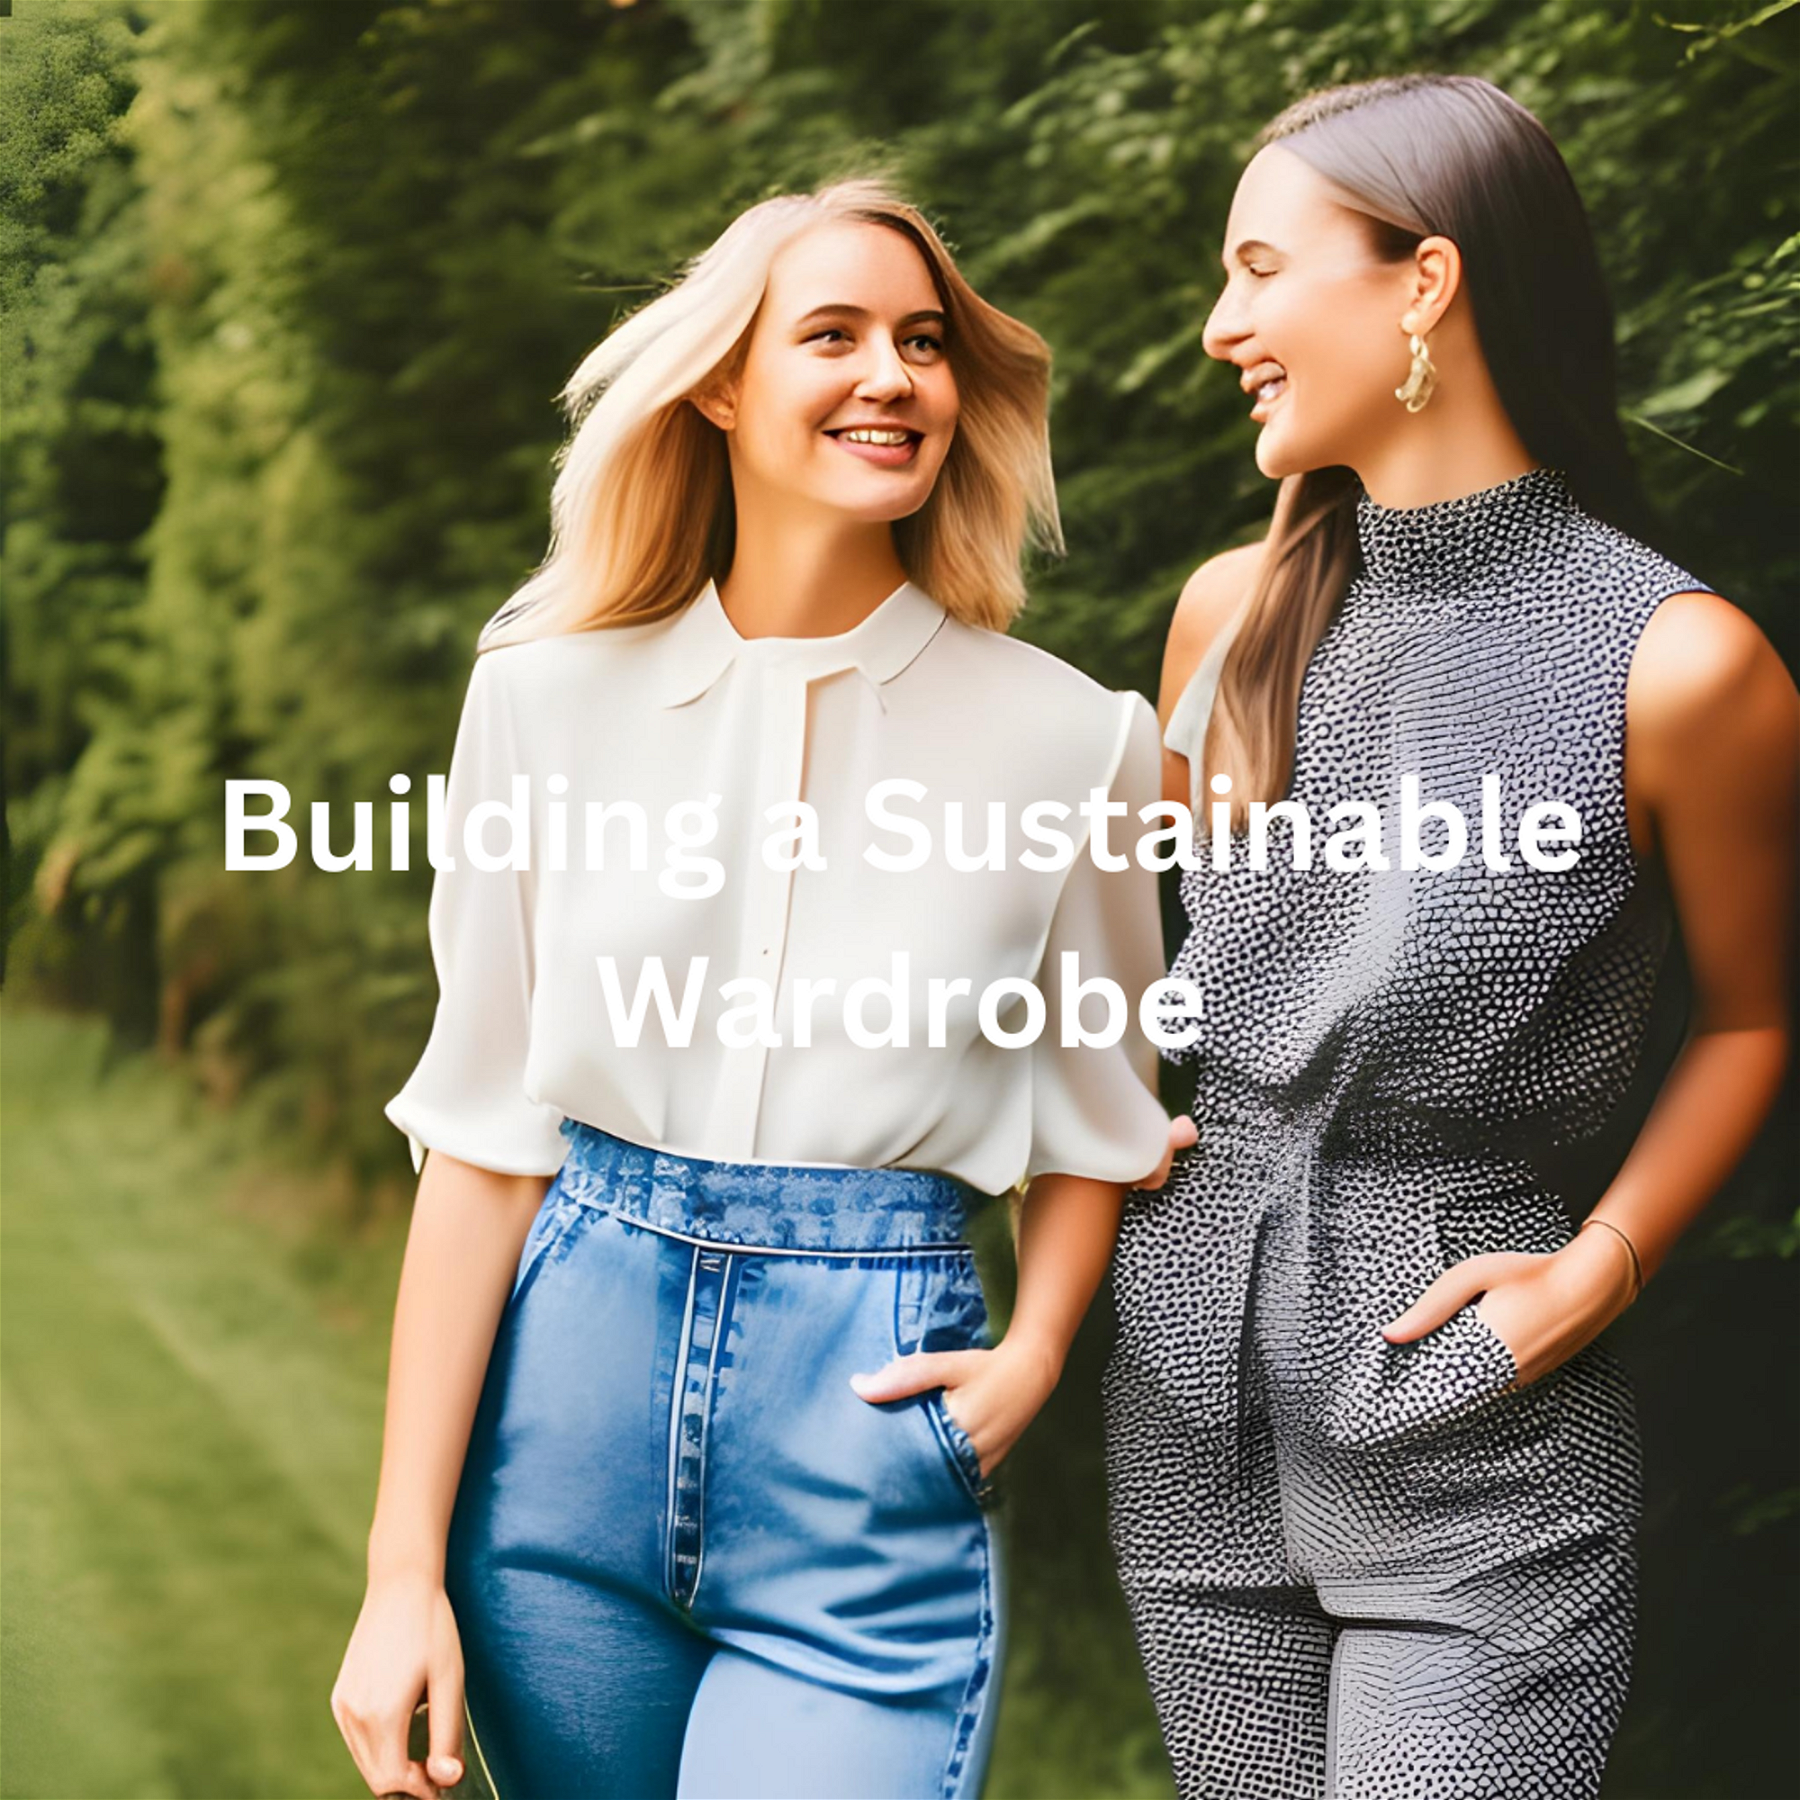 Building a Sustainable Wardrobe: Practical Tips for Budget-Friendly Choices